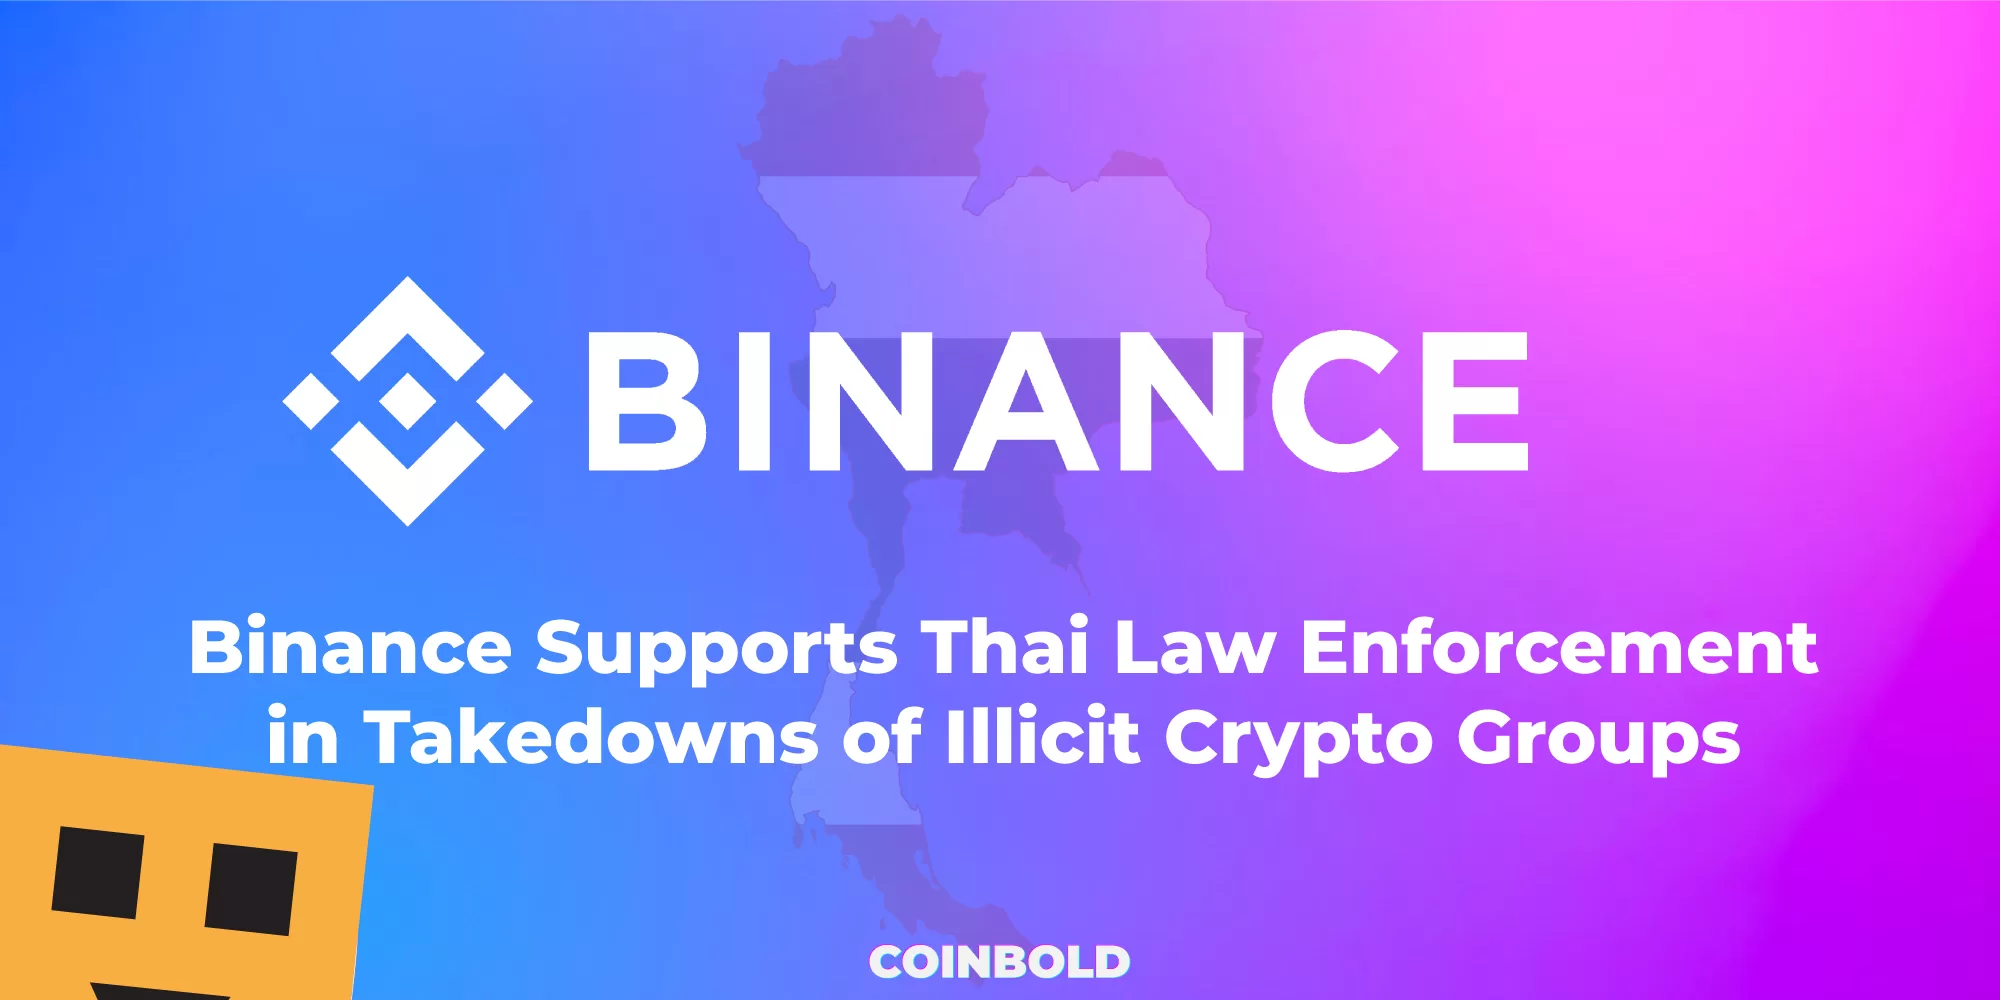 Binance Supports Thai Law Enforcement in Takedowns of Illicit Crypto Groups